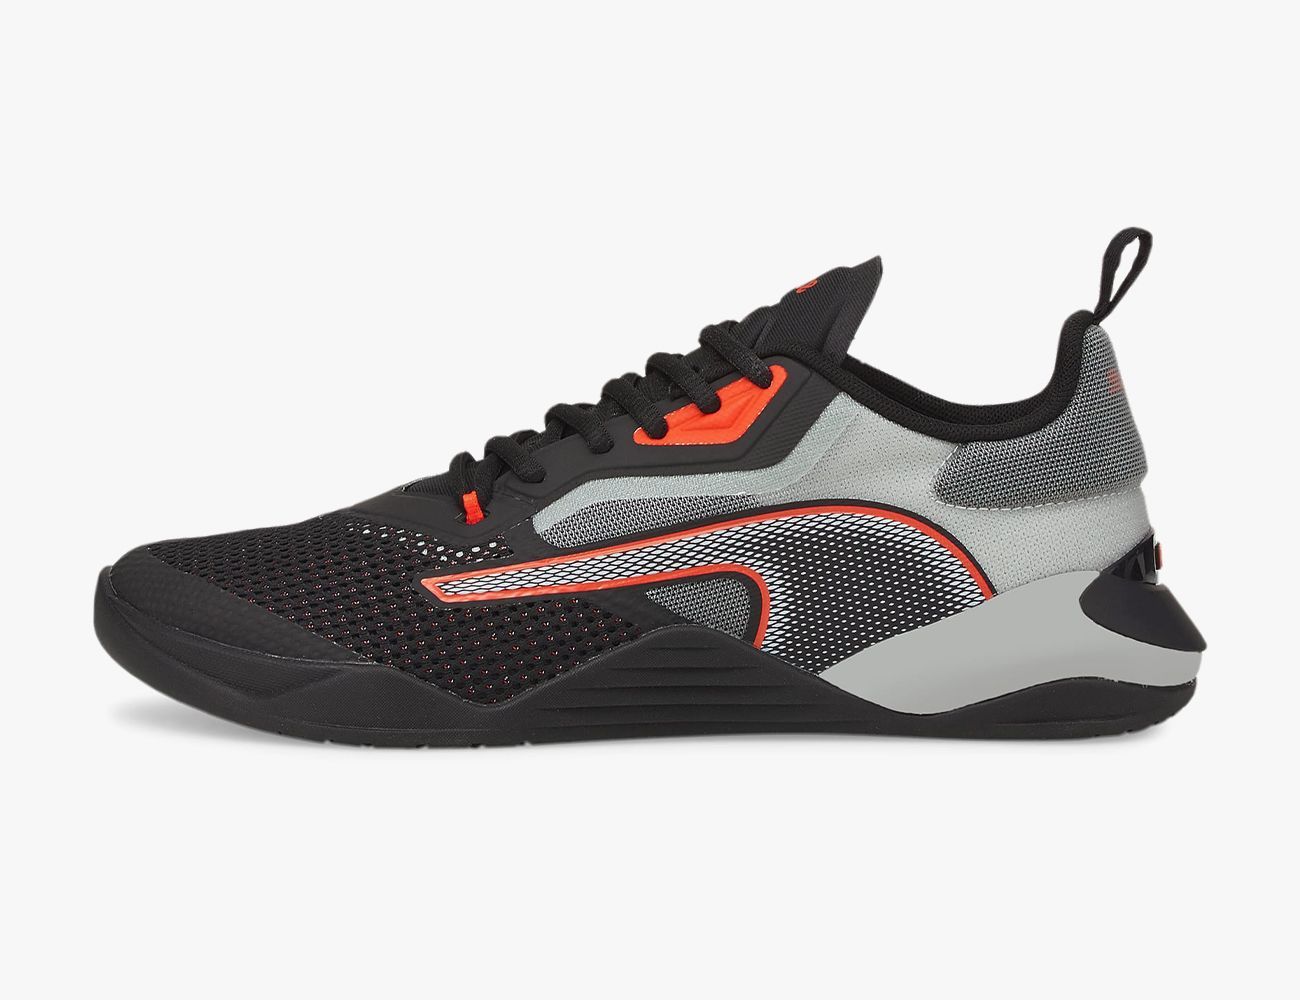 Other places cartridge casualties The Best Gym Shoes for Men for Every Type of Workout